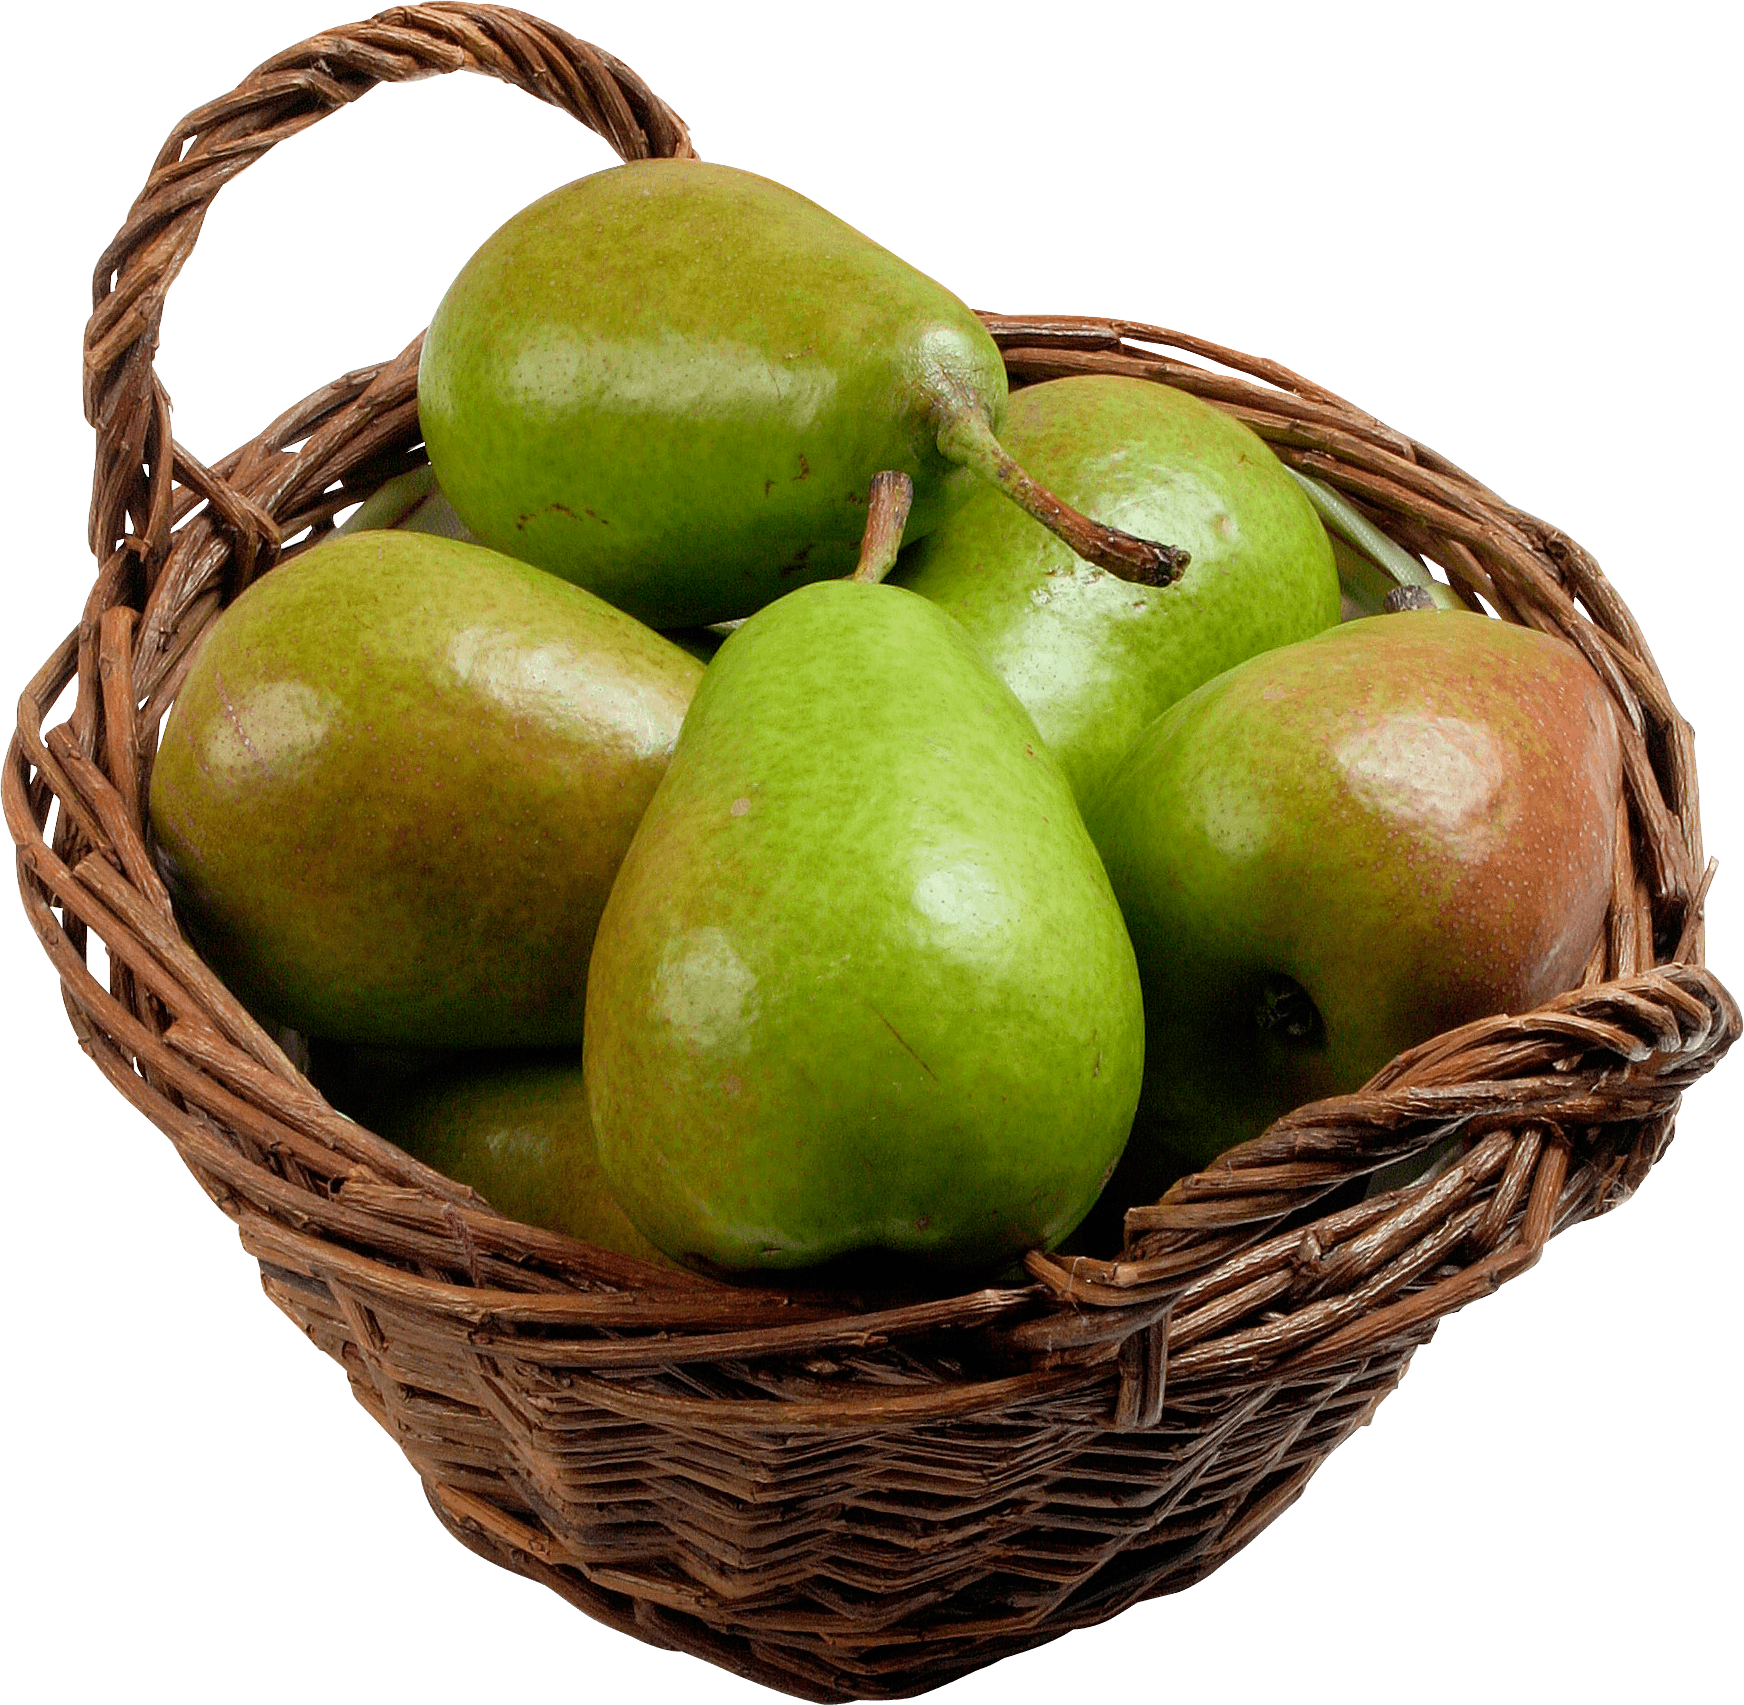 A Basket Of Pears